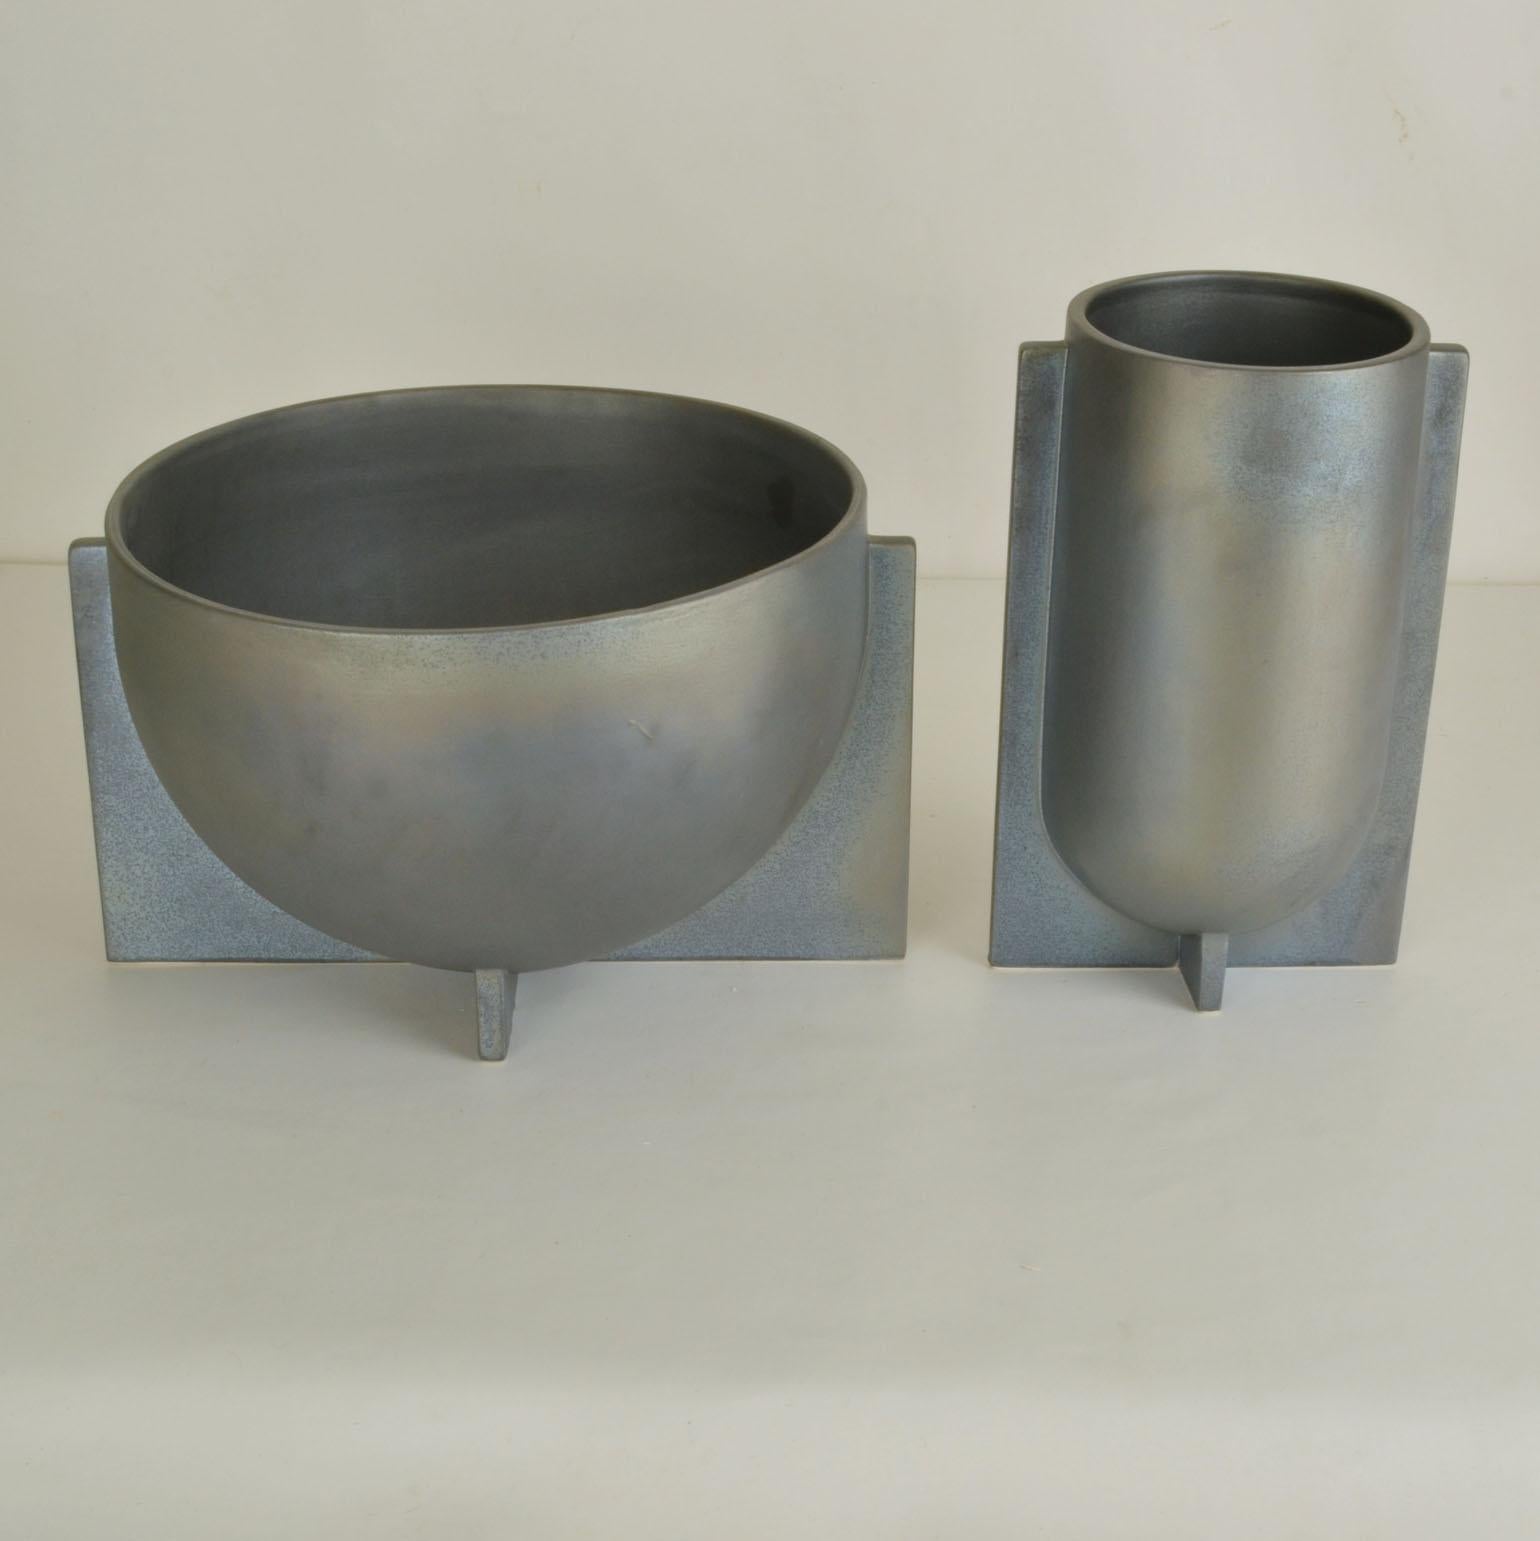 Pair of decorative sculptural vases with soft metal blue-grey glaze in different sizes have a modern geometric shape. They will perfectly stage flowers or plants. In unused condition.

Individual sizes; 
Width tall one 13 x 16, Height 26 cm 
Width